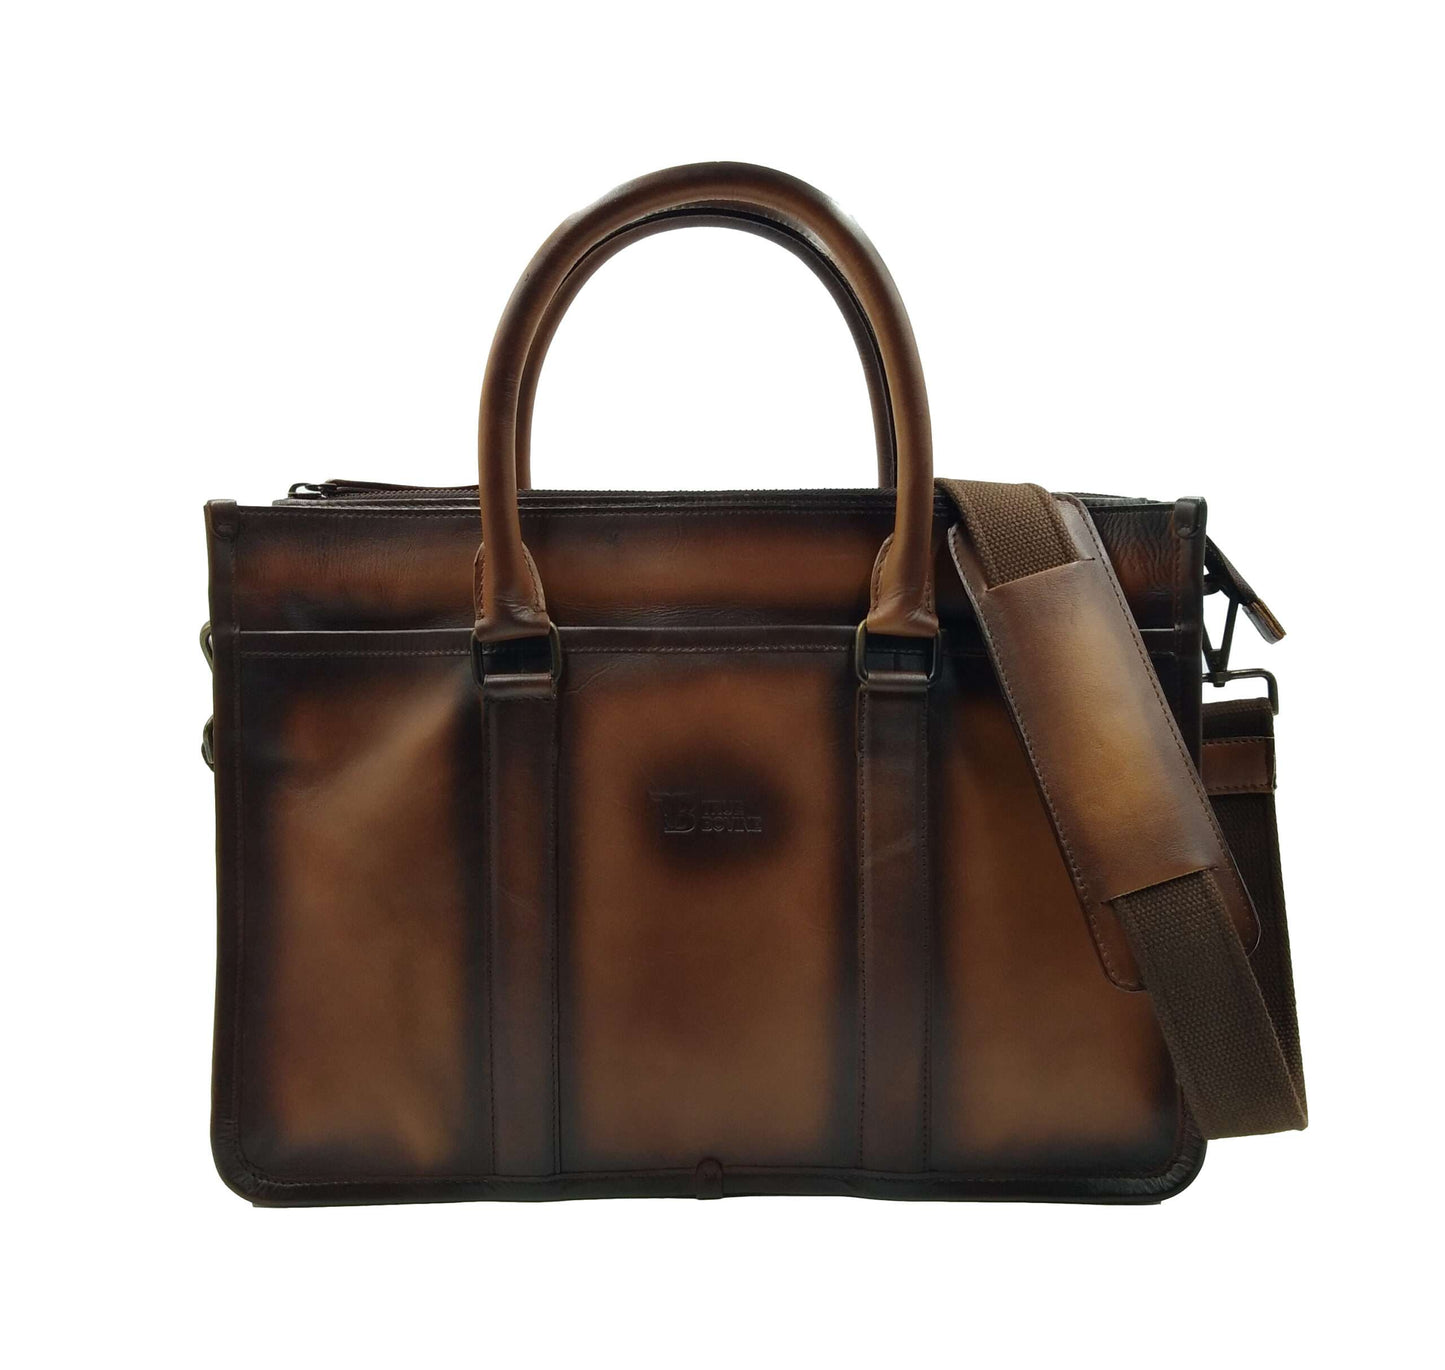 Launch Bamboo Leather Laptop Bag